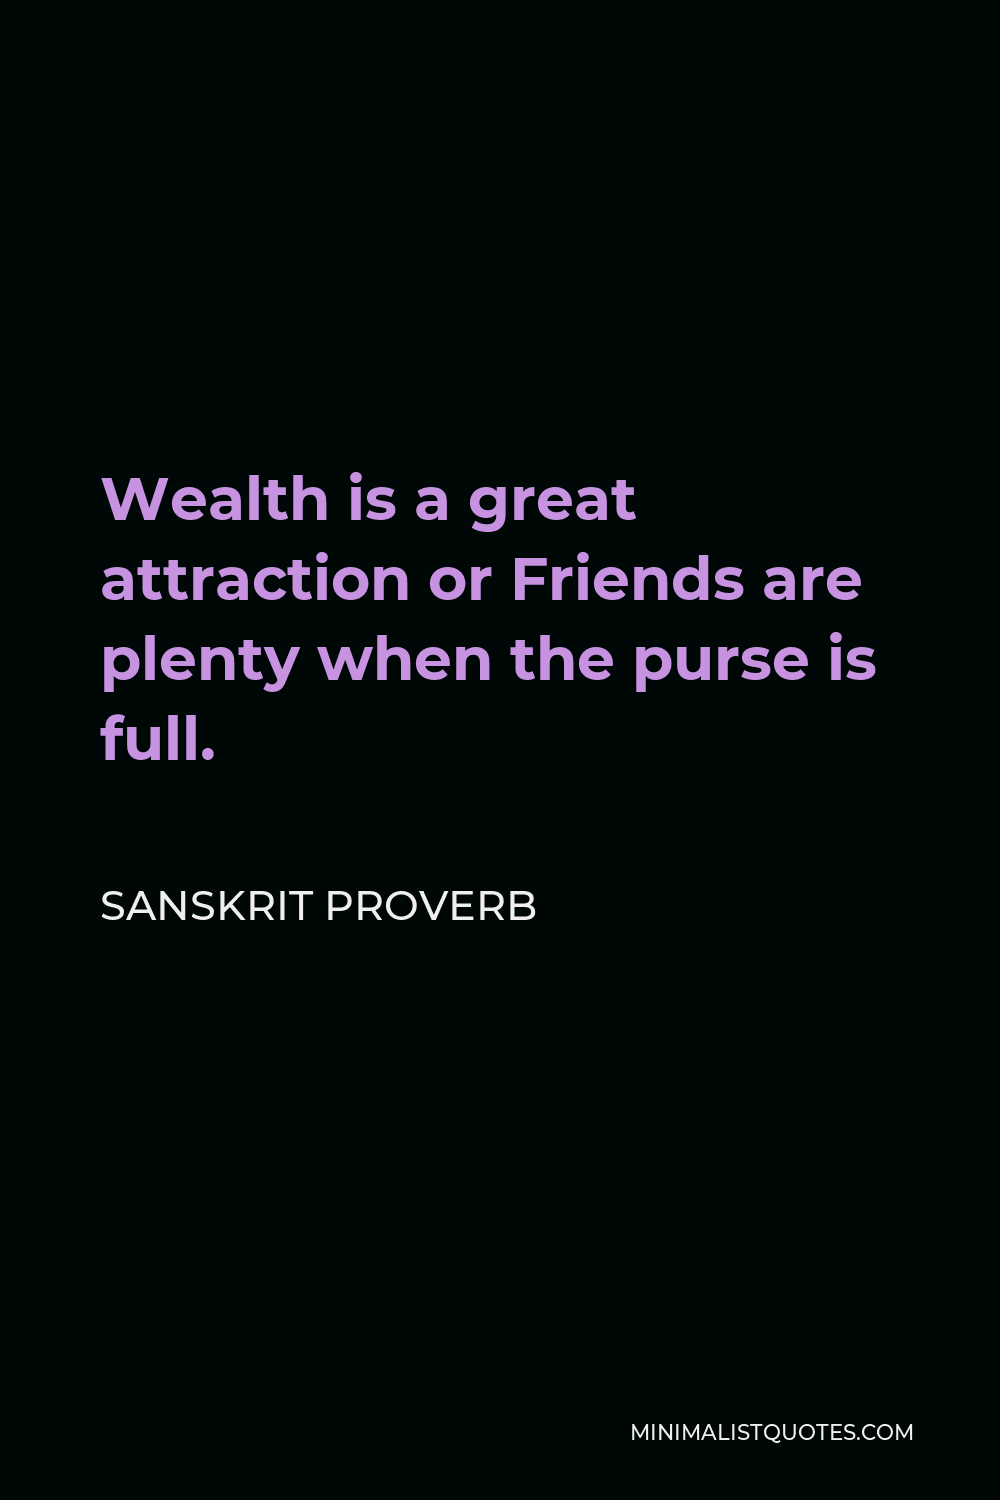 Sanskrit Proverb Quote - Wealth is a great attraction or Friends are plenty when the purse is full.